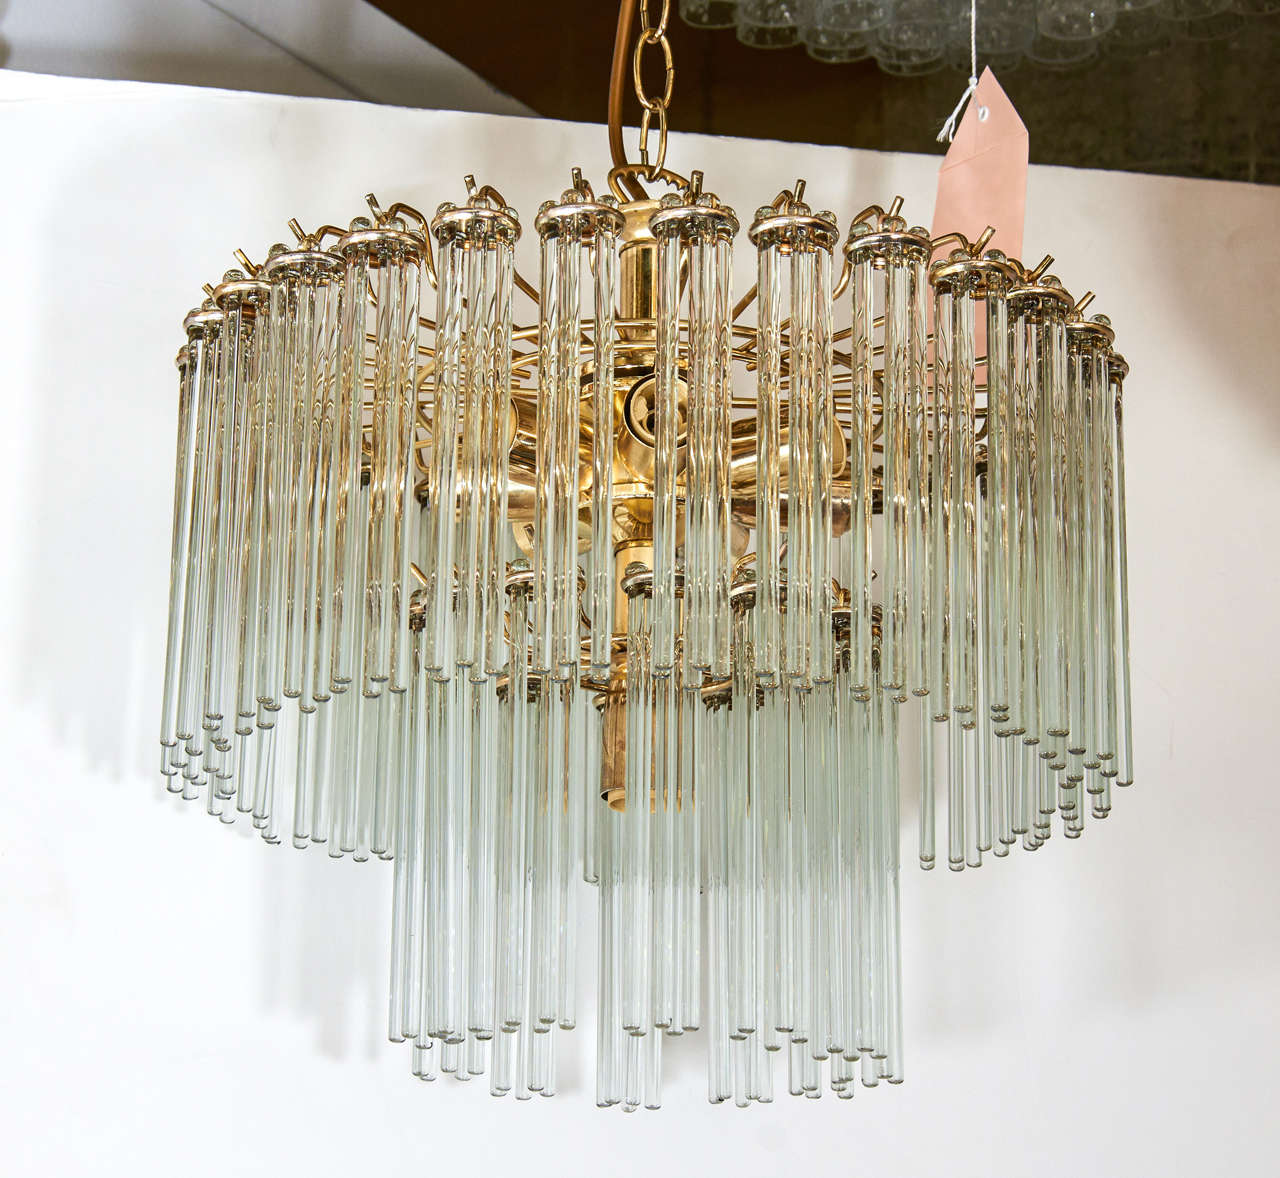 A Midcentury Two-Tier Brass and Glass Chandelier by Staff at 1stDibs